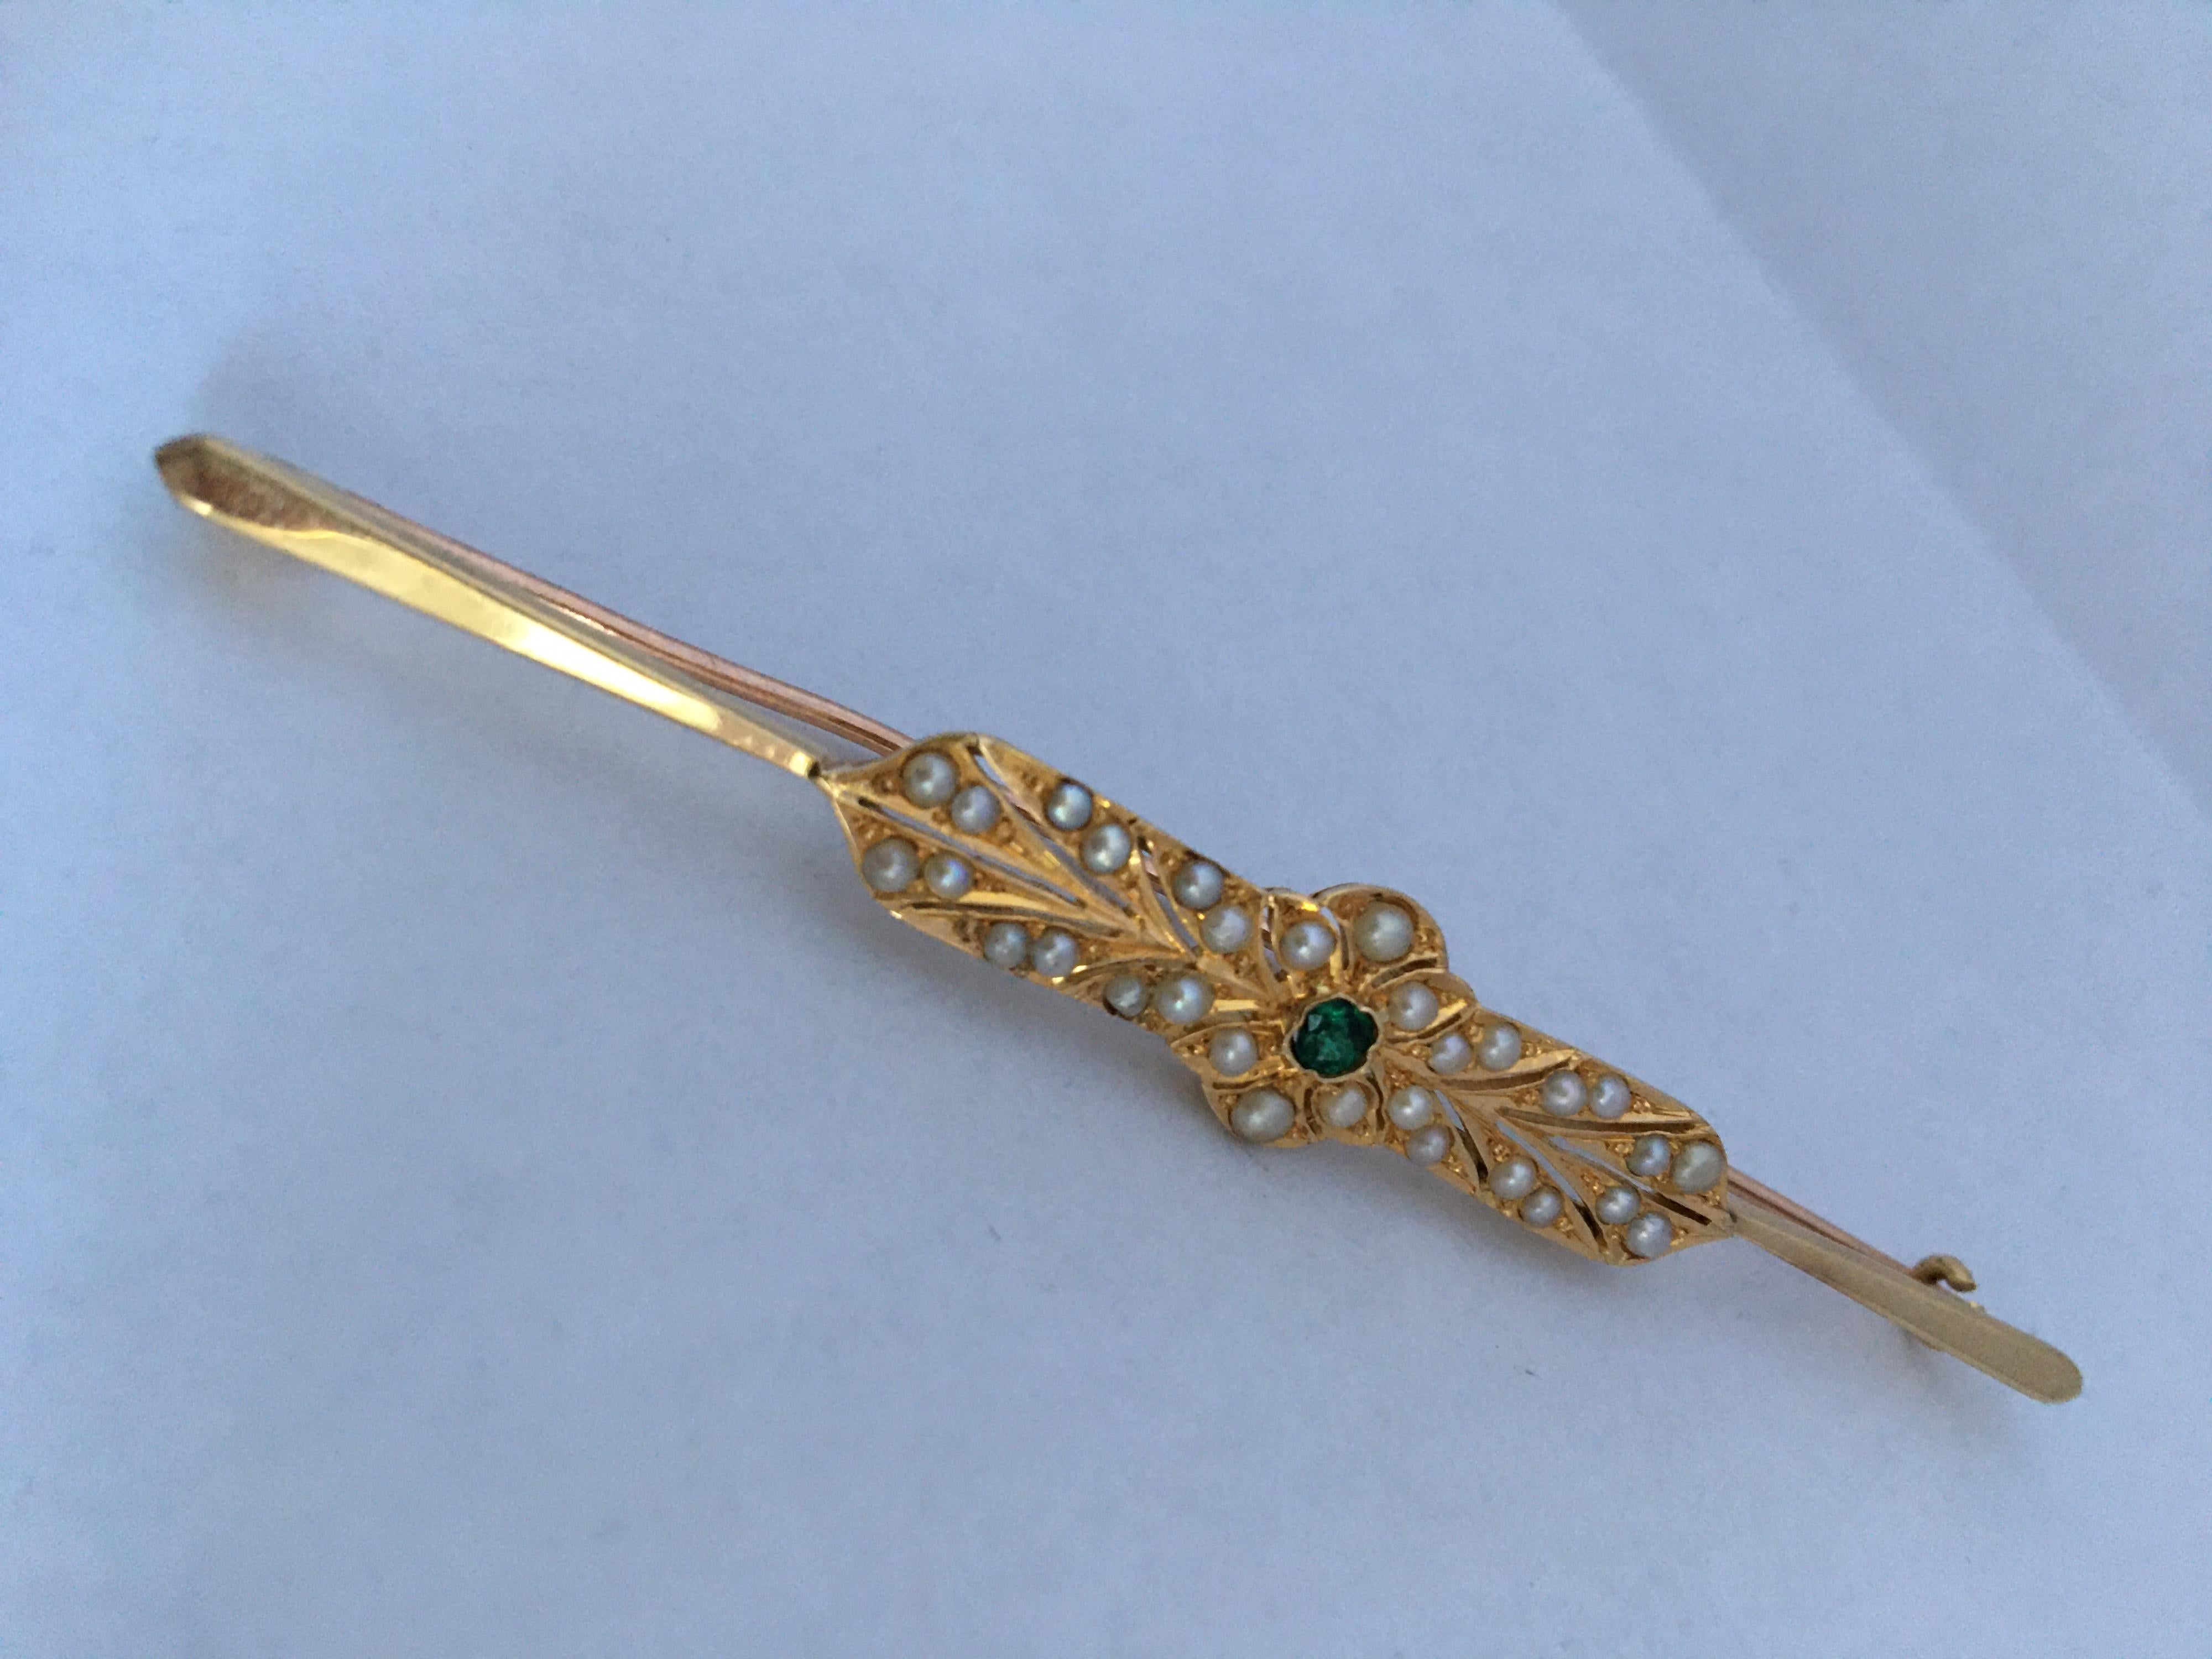 18 Karat Gold Victorian Brooch / Pin with Seeded Pear and Emerald For Sale 7